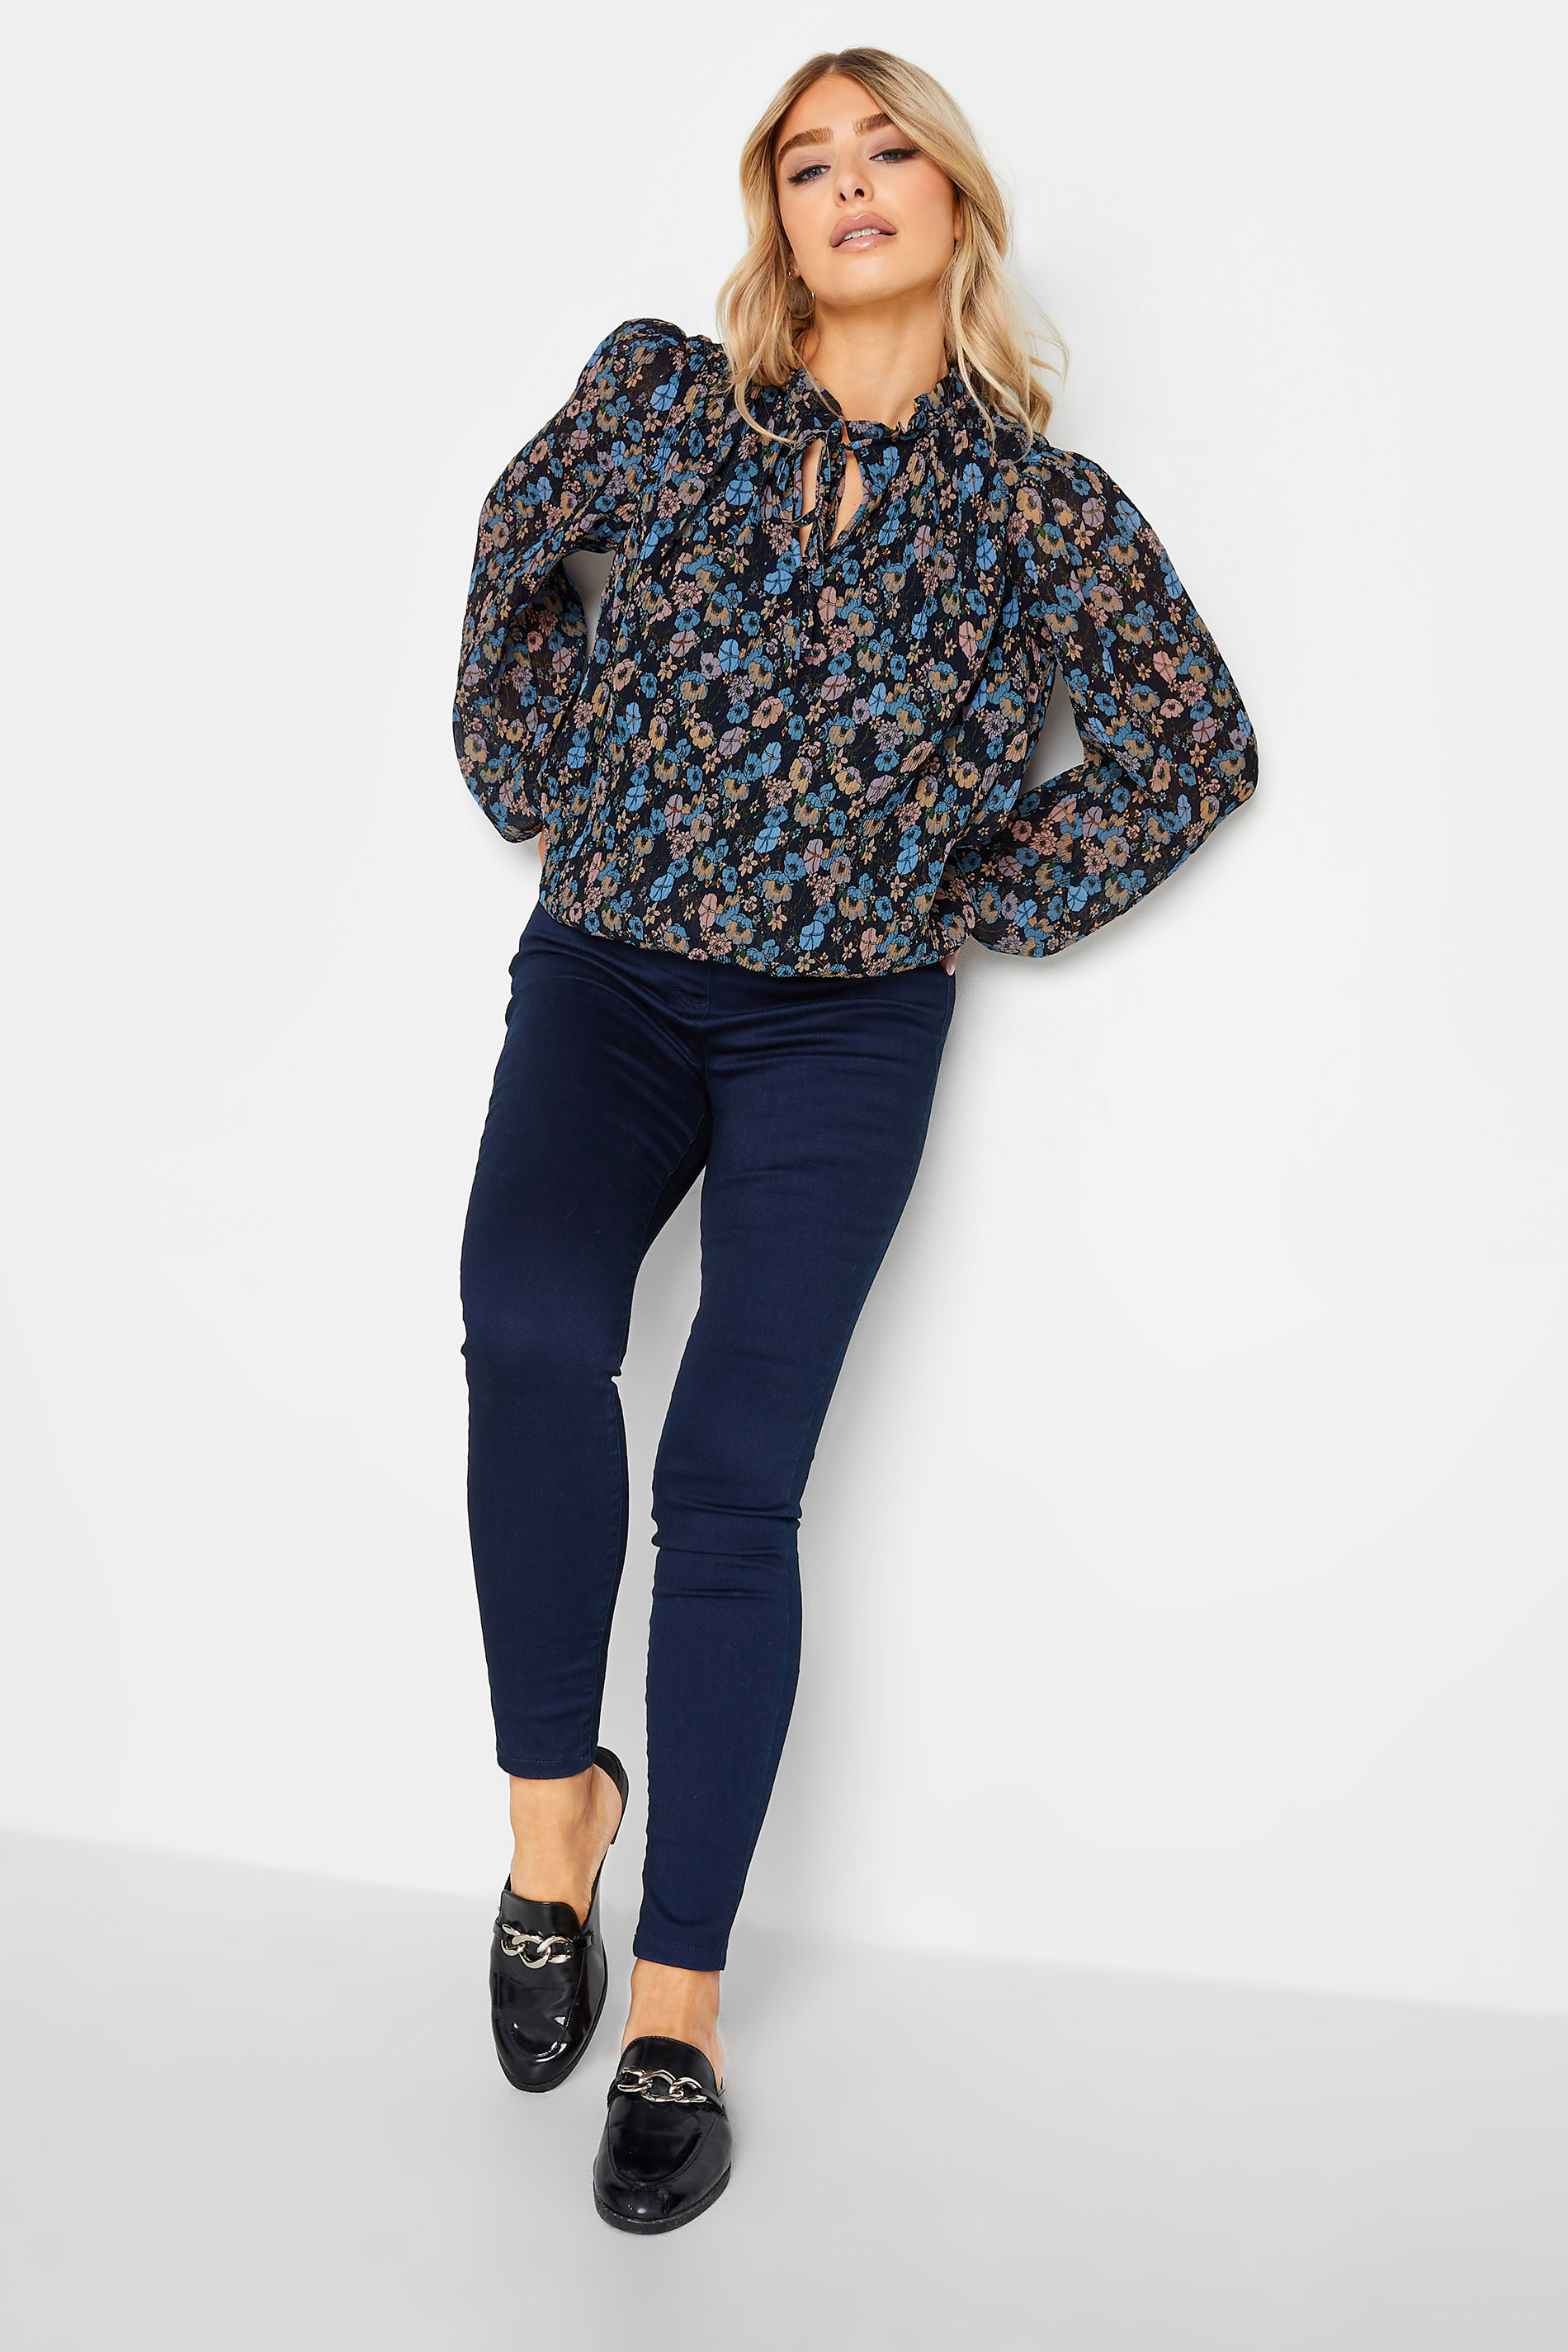 M&Co Navy Blue Floral Pleated Blouse | M&Co 2